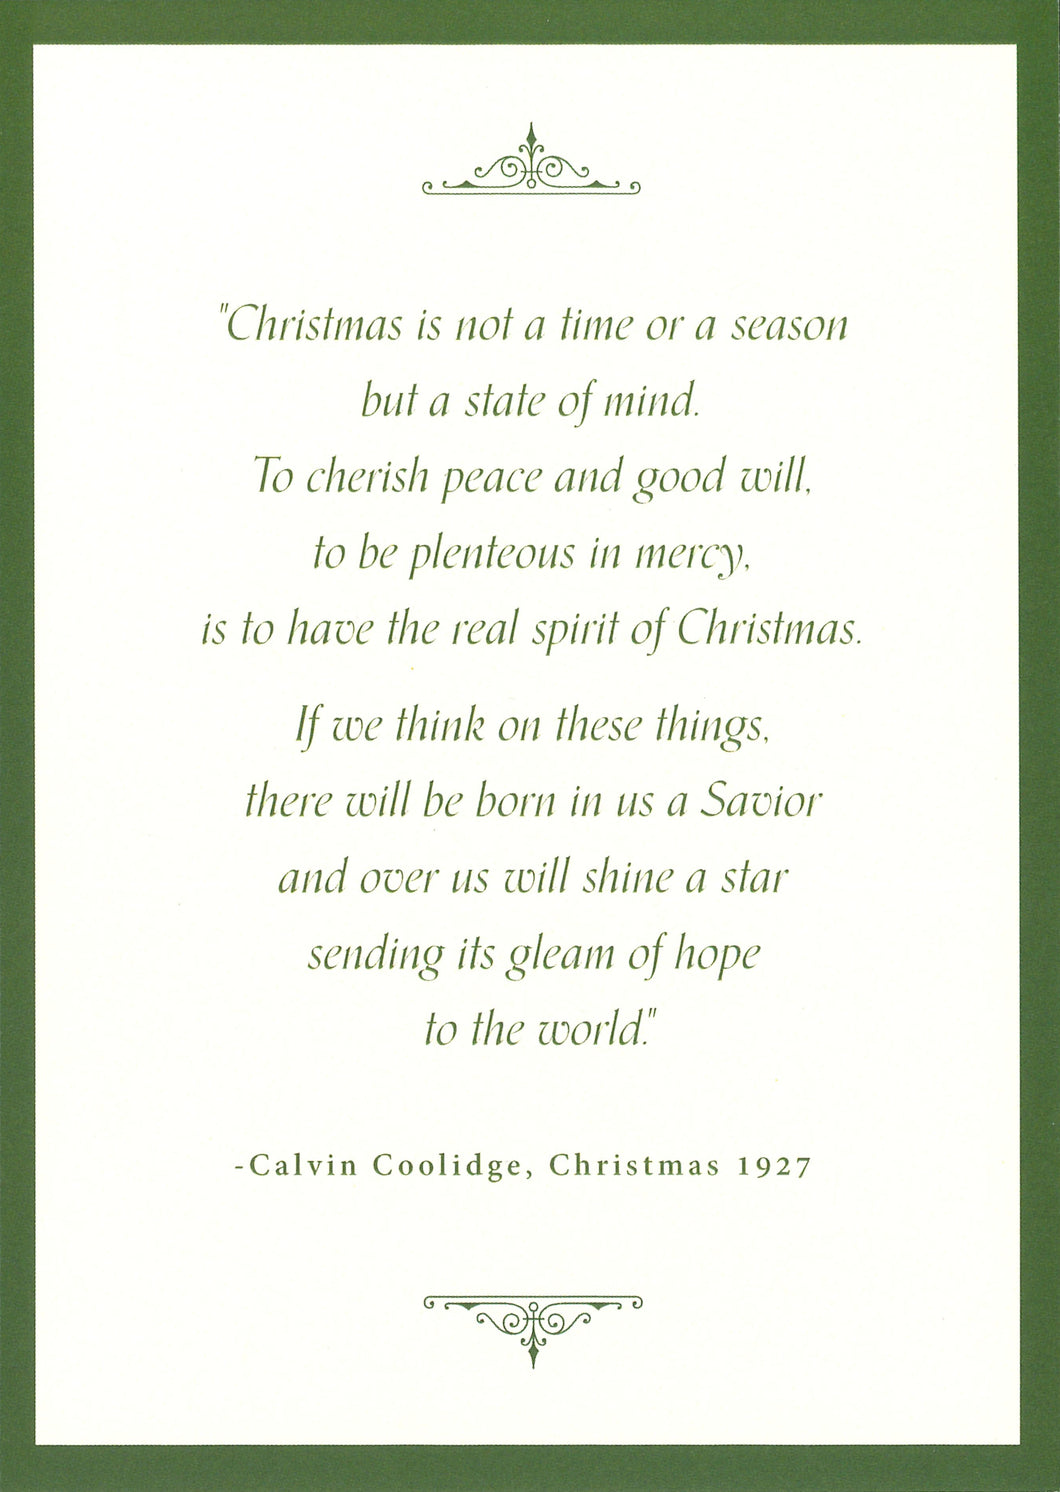 Coolidge 1927 Christmas Message Cards (8 count)